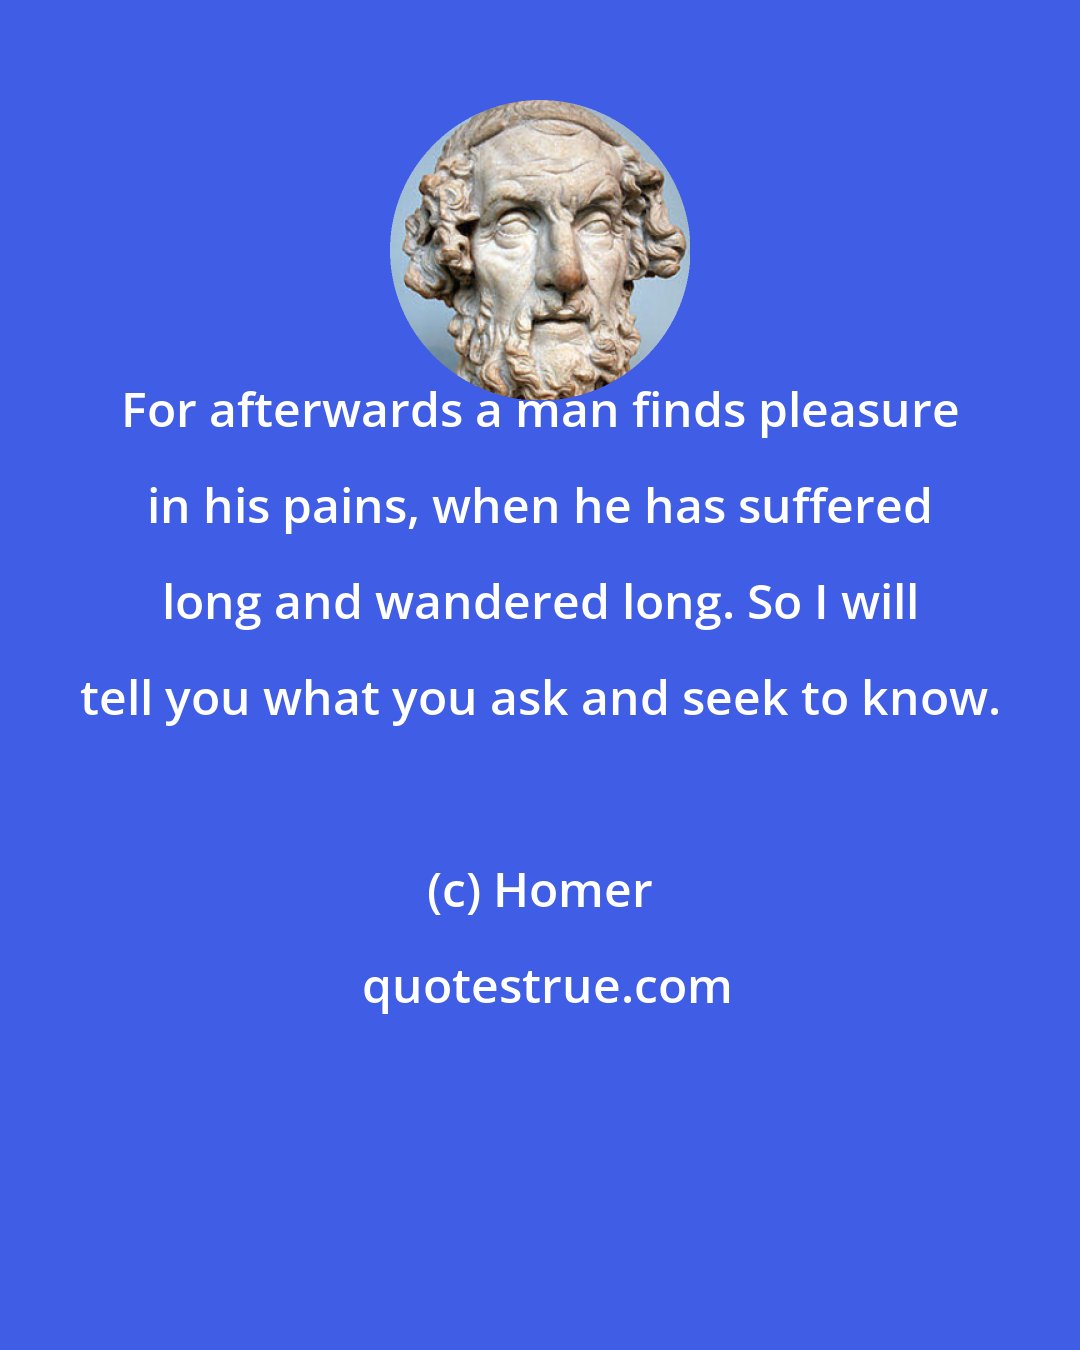 Homer: For afterwards a man finds pleasure in his pains, when he has suffered long and wandered long. So I will tell you what you ask and seek to know.